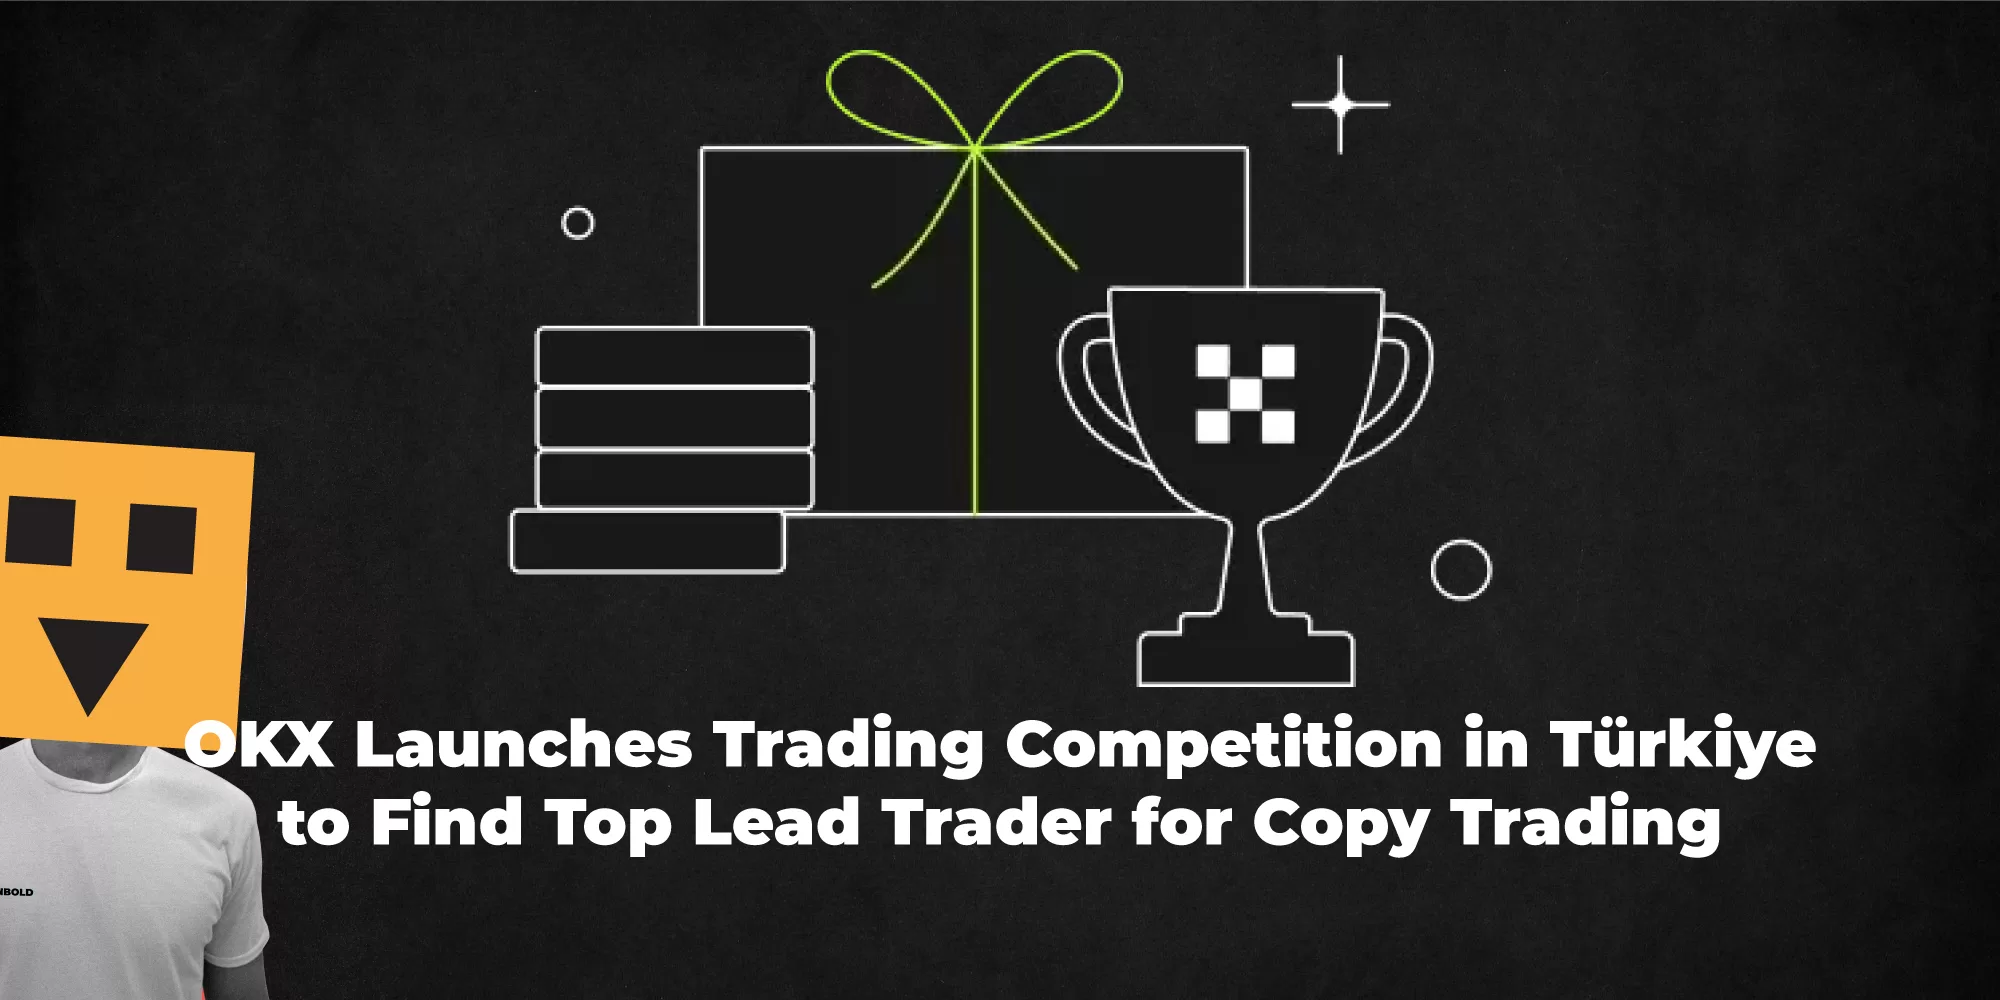 OKX Launches Trading Competition in Türkiye to Find Top Lead Trader for Copy Trading